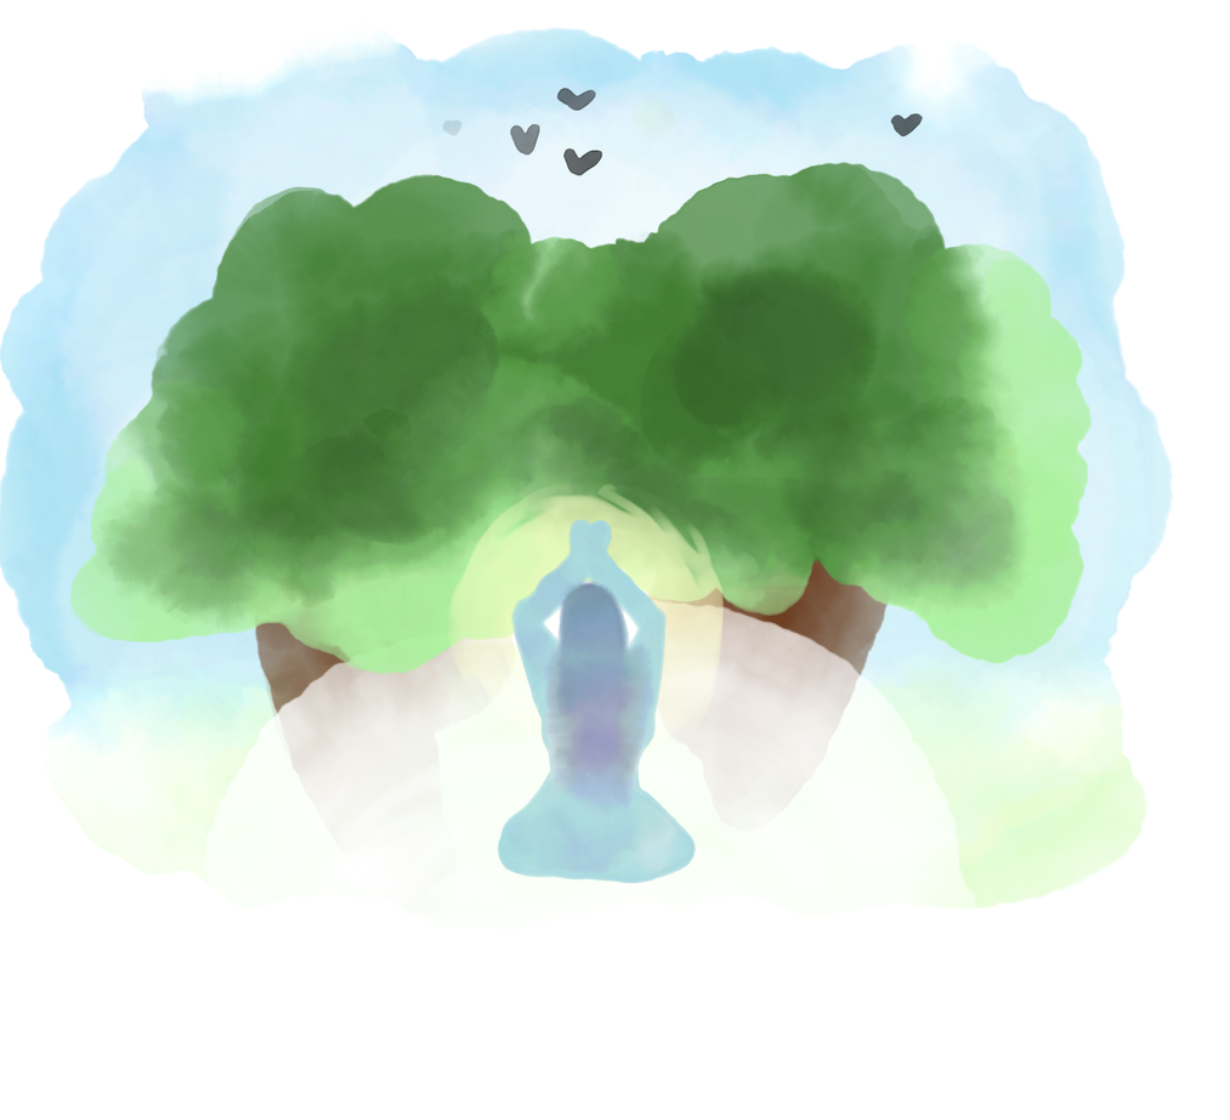 A blue figure sits on the ground in a yoga pose surrounded by a nature scene with green trees, a blue sky and birds flying.